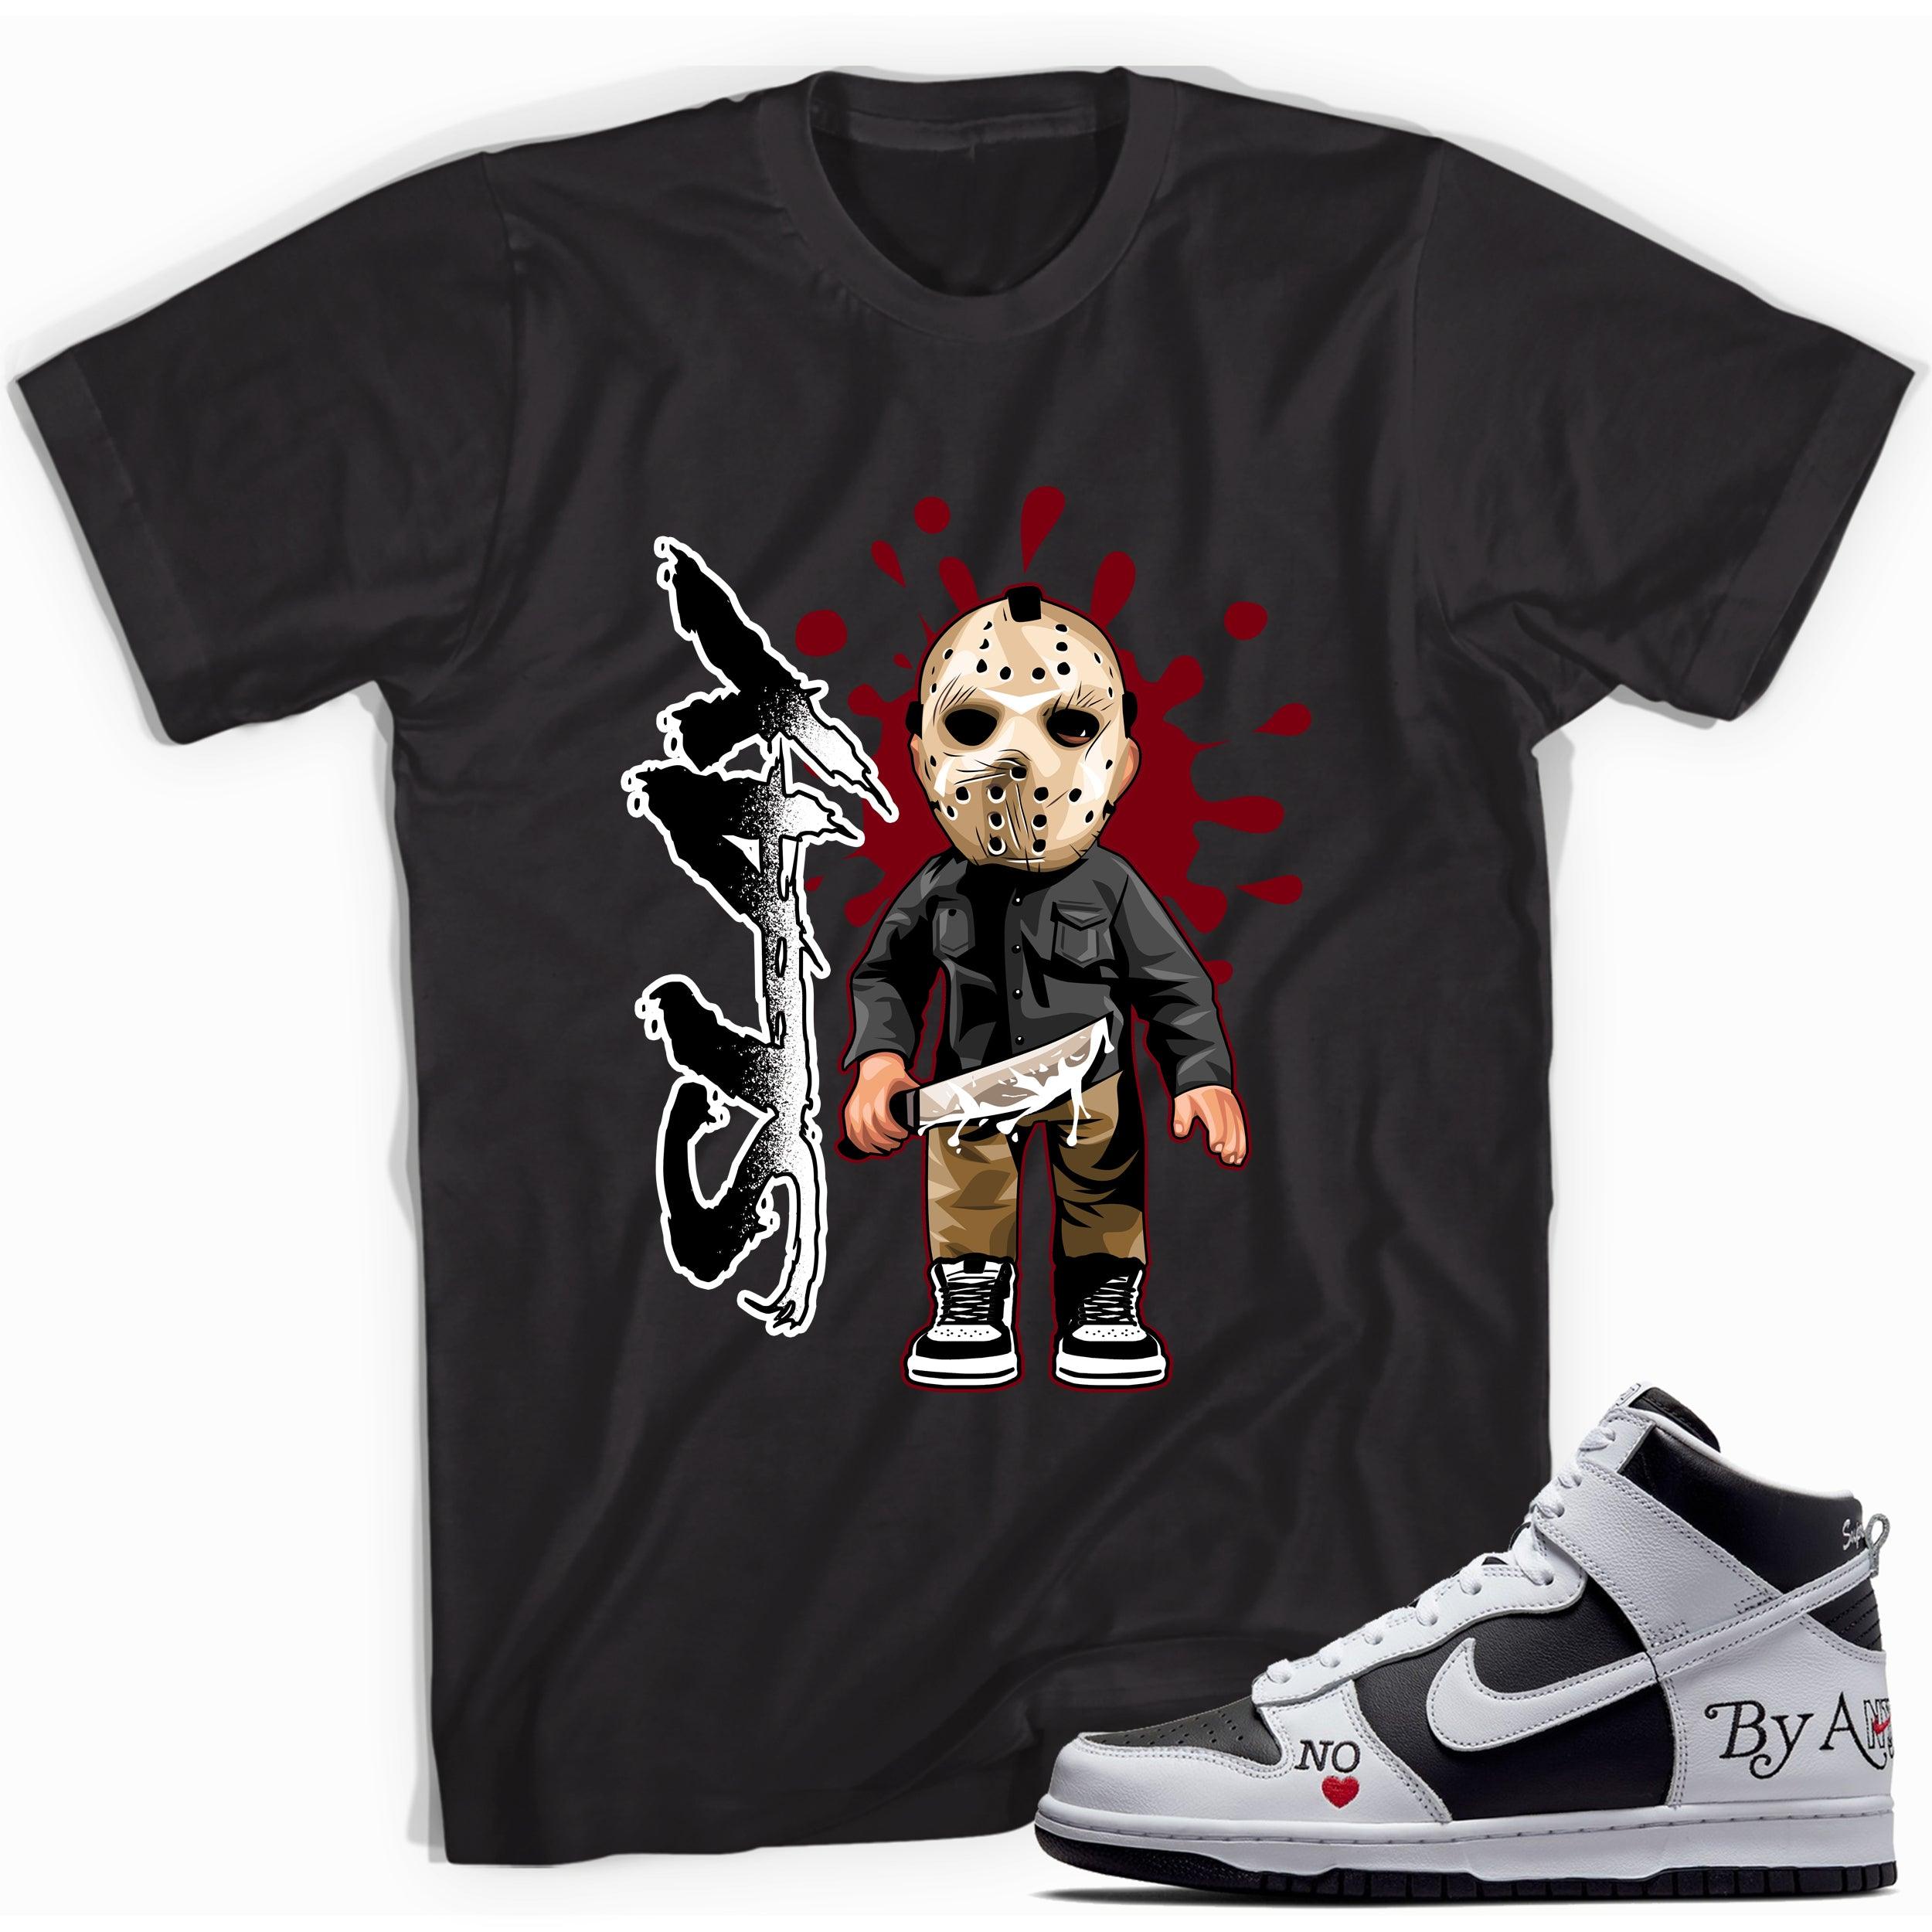 Black Slay Sneaker Shirt for Nike SB Dunk By Any Means photo